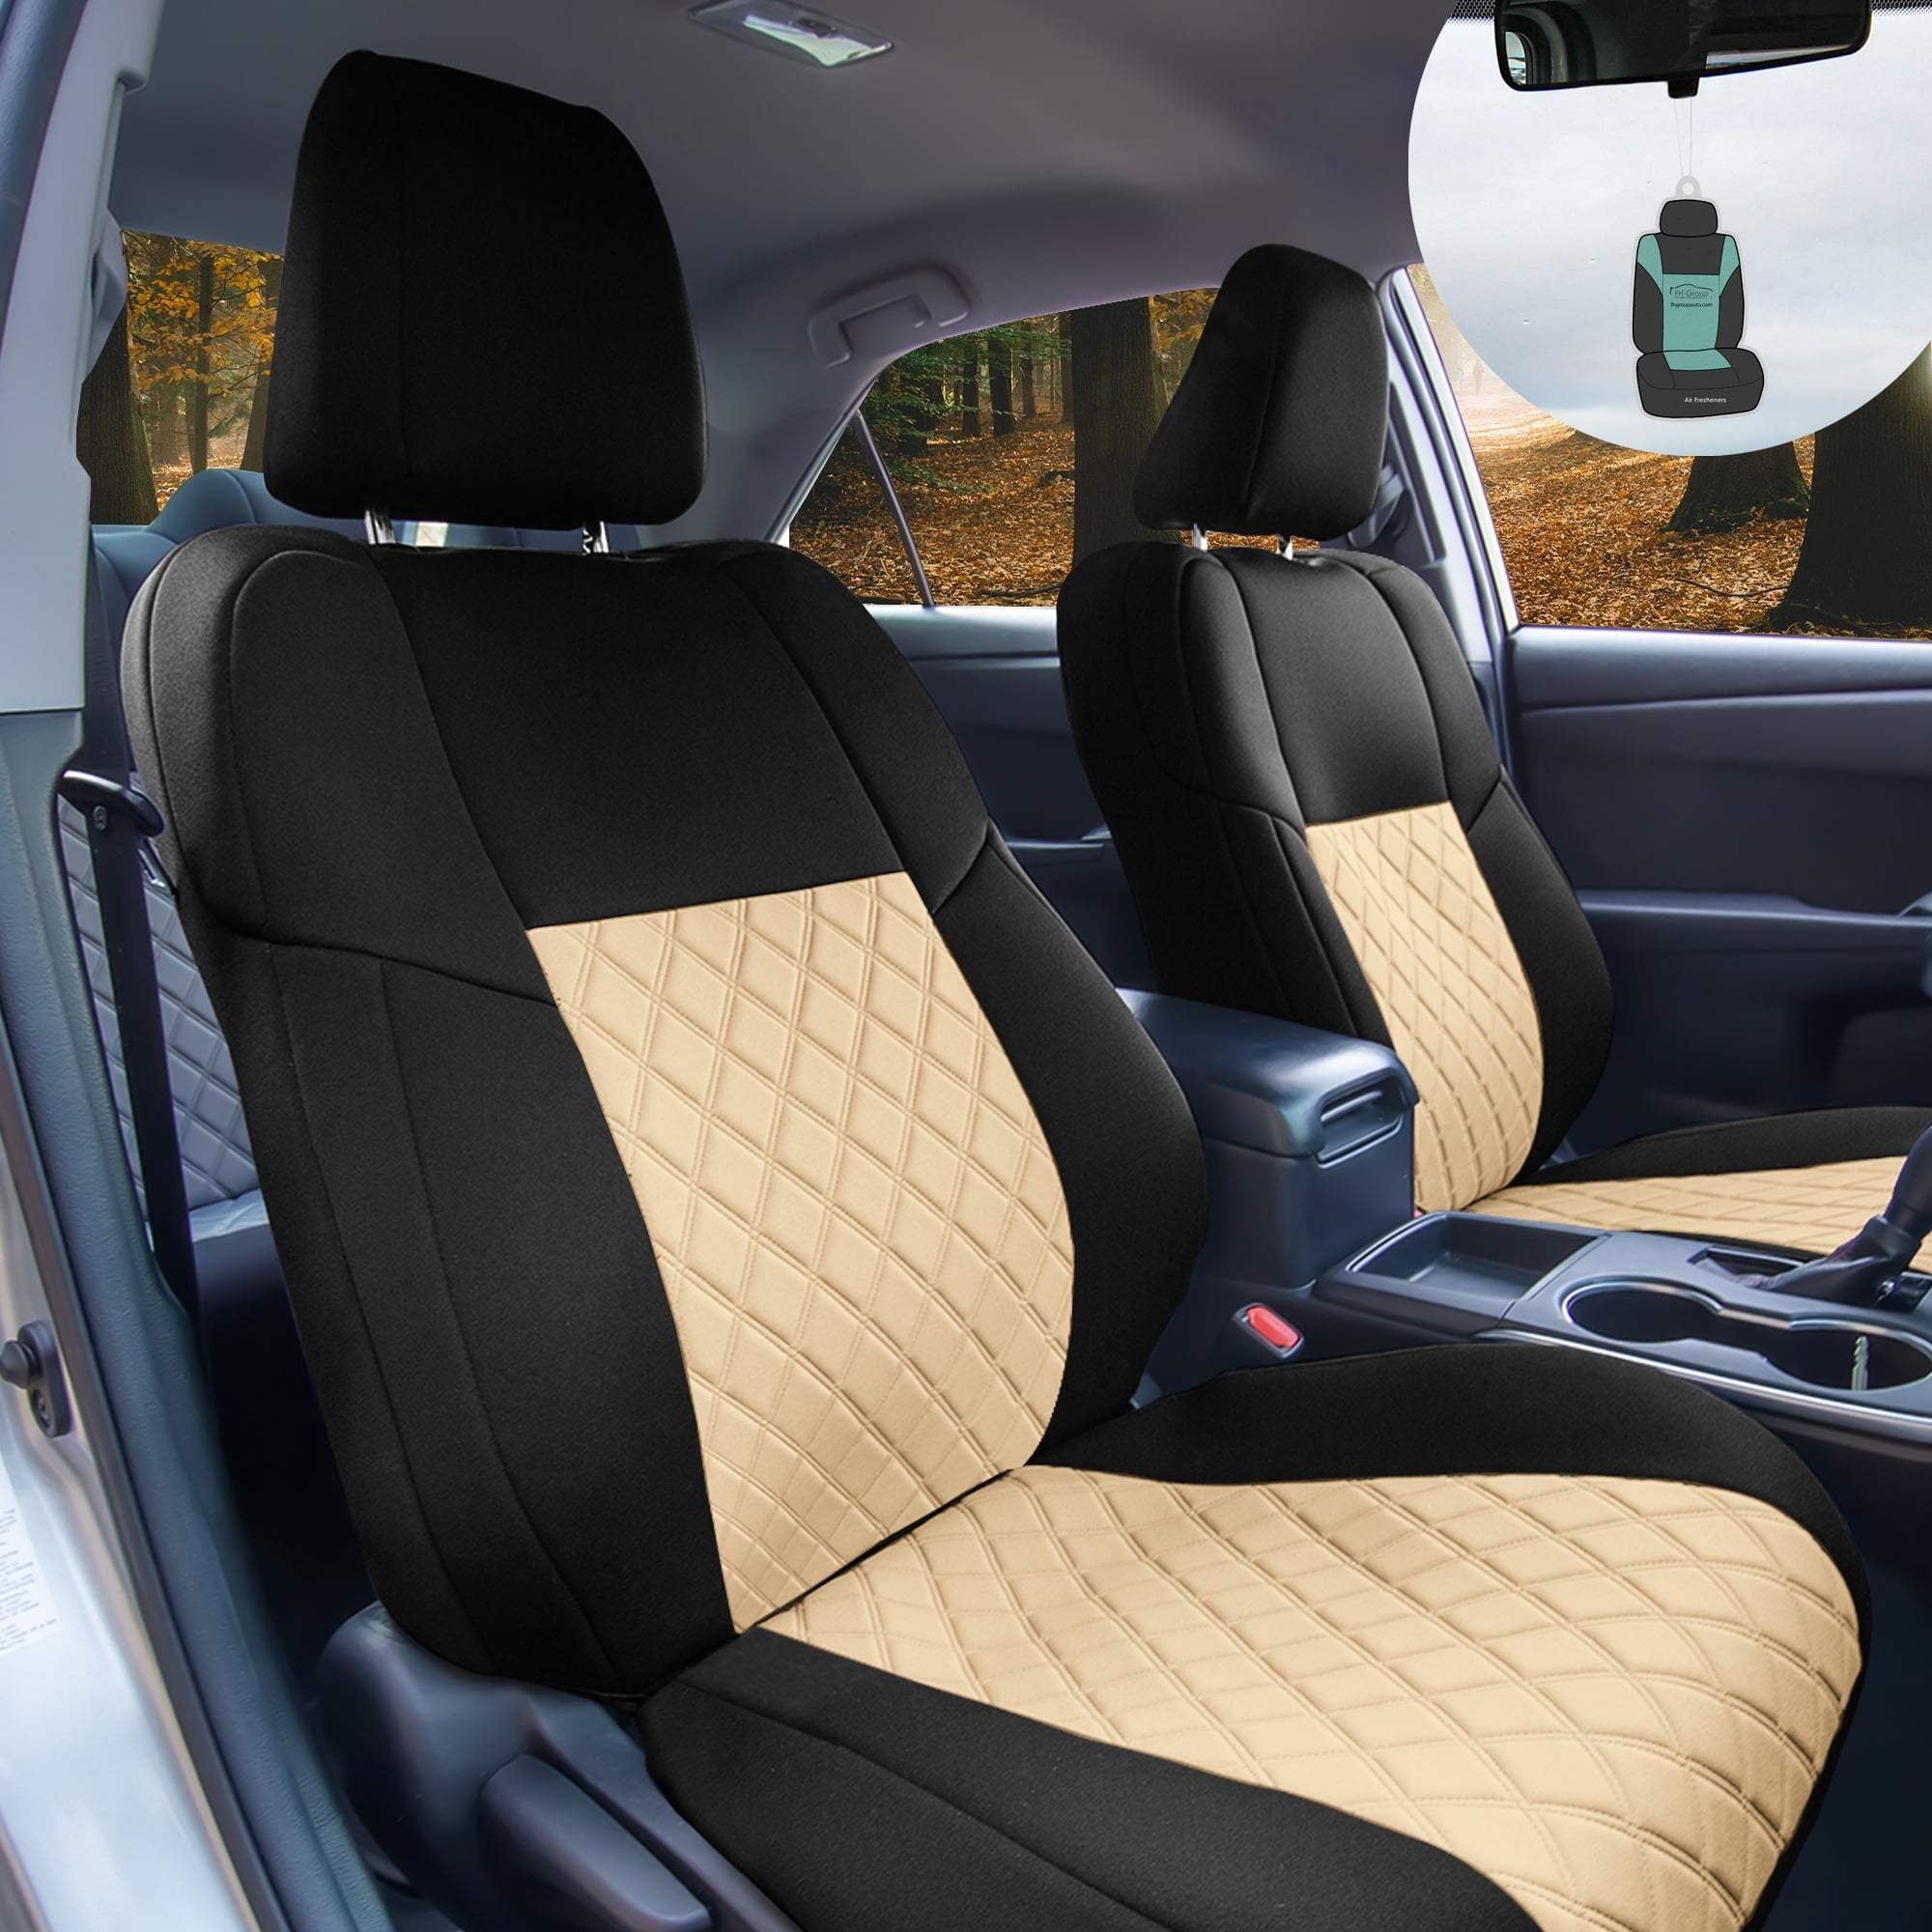 Melanin Automotive Seat Covers Black And Boujee Seat Protector